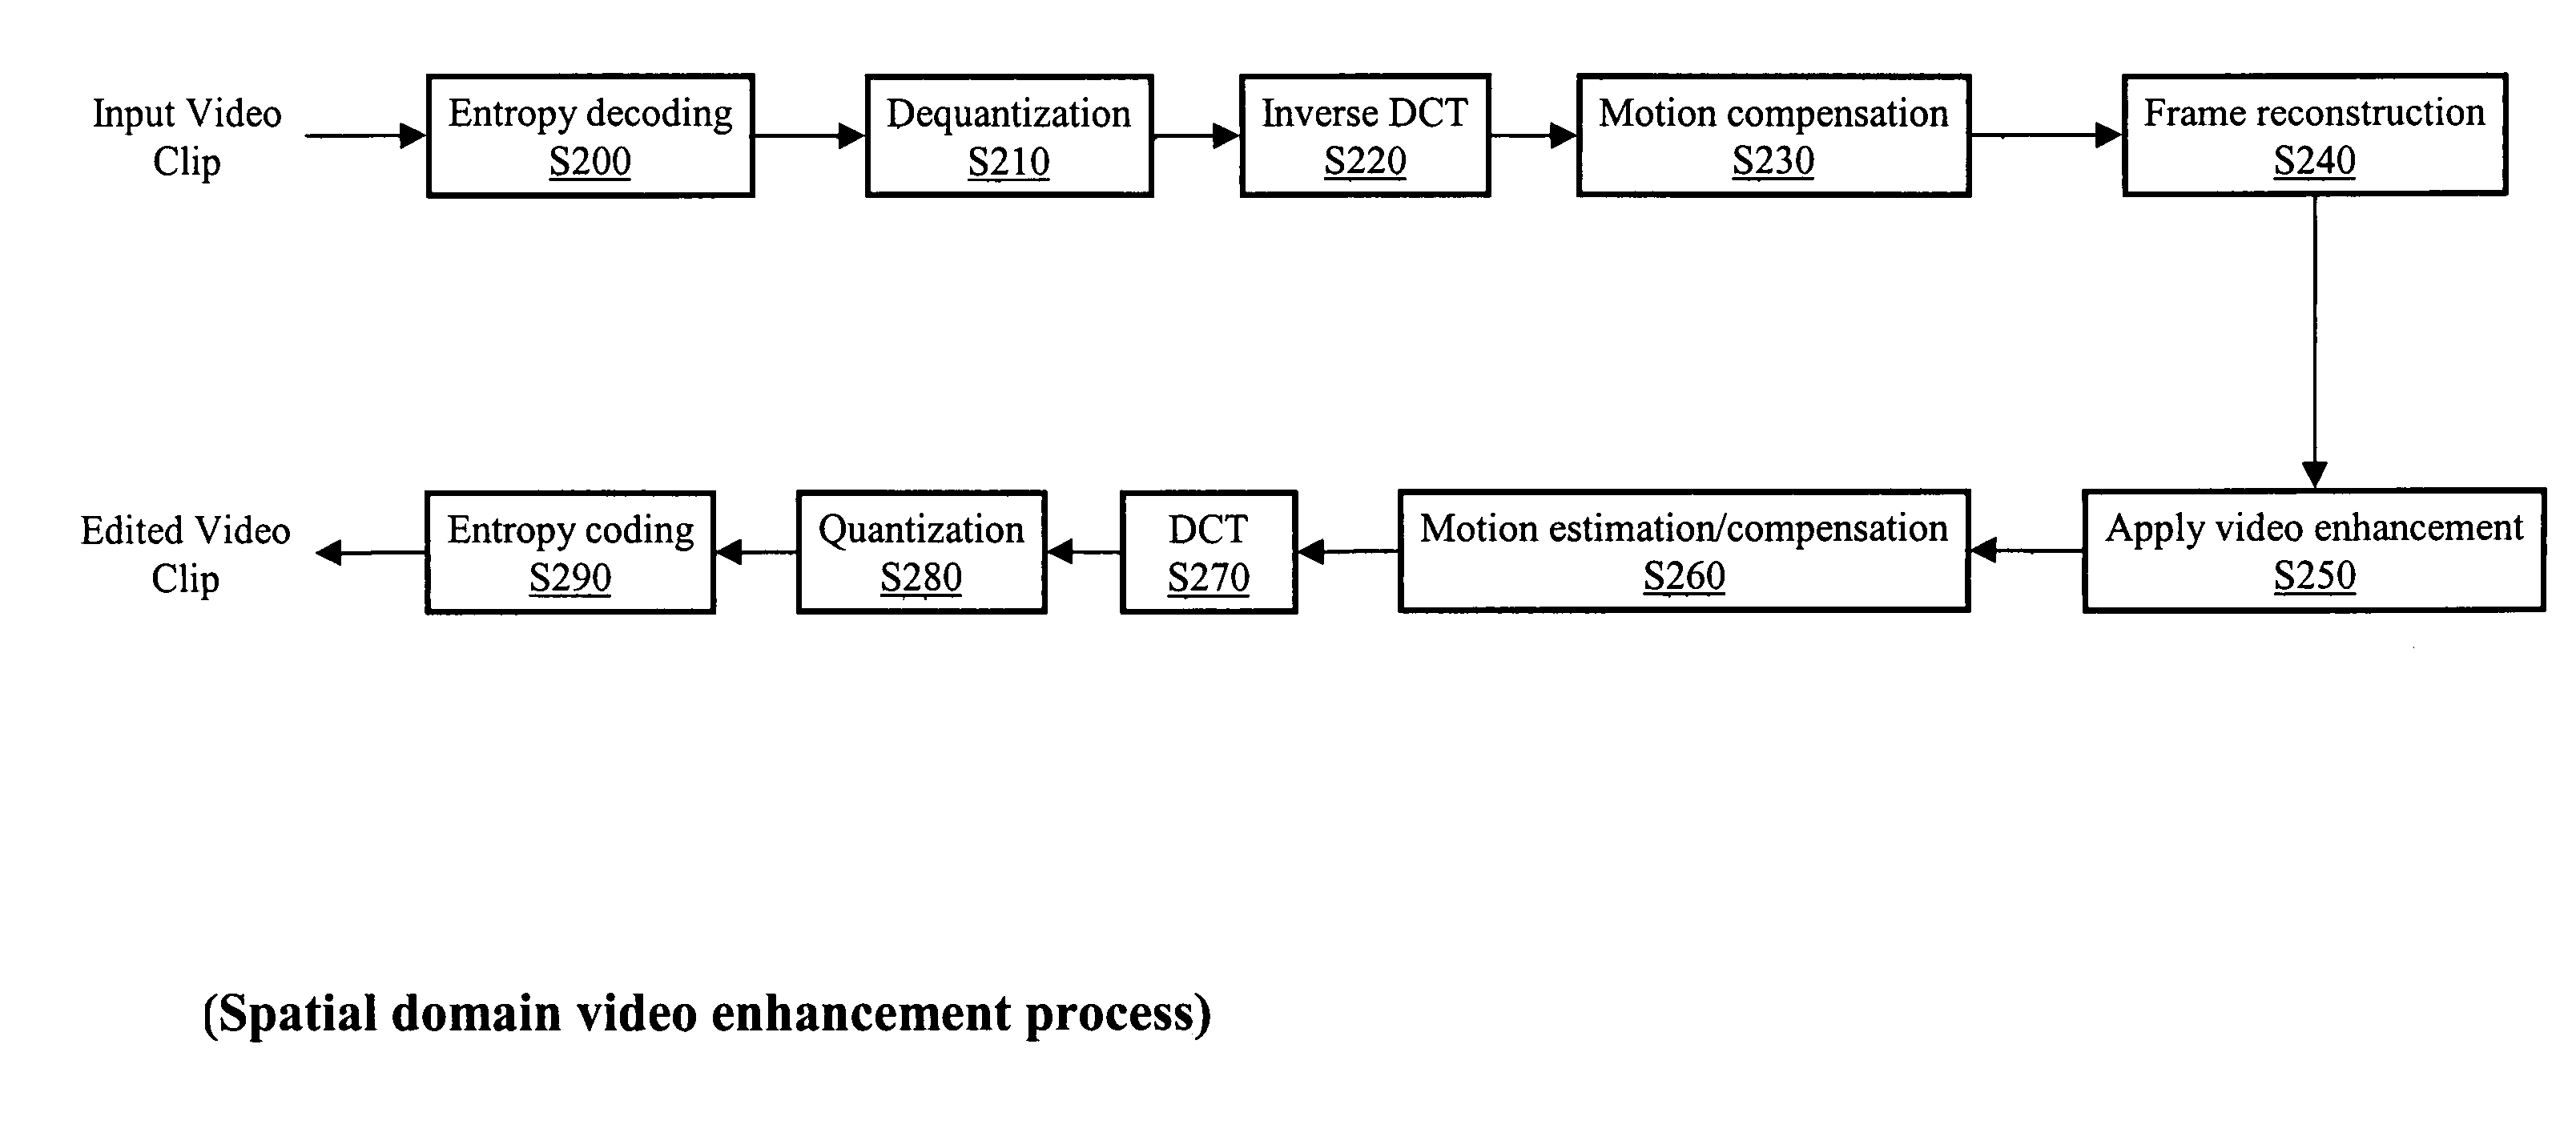 Image processing of DCT-based video sequences in compressed domain